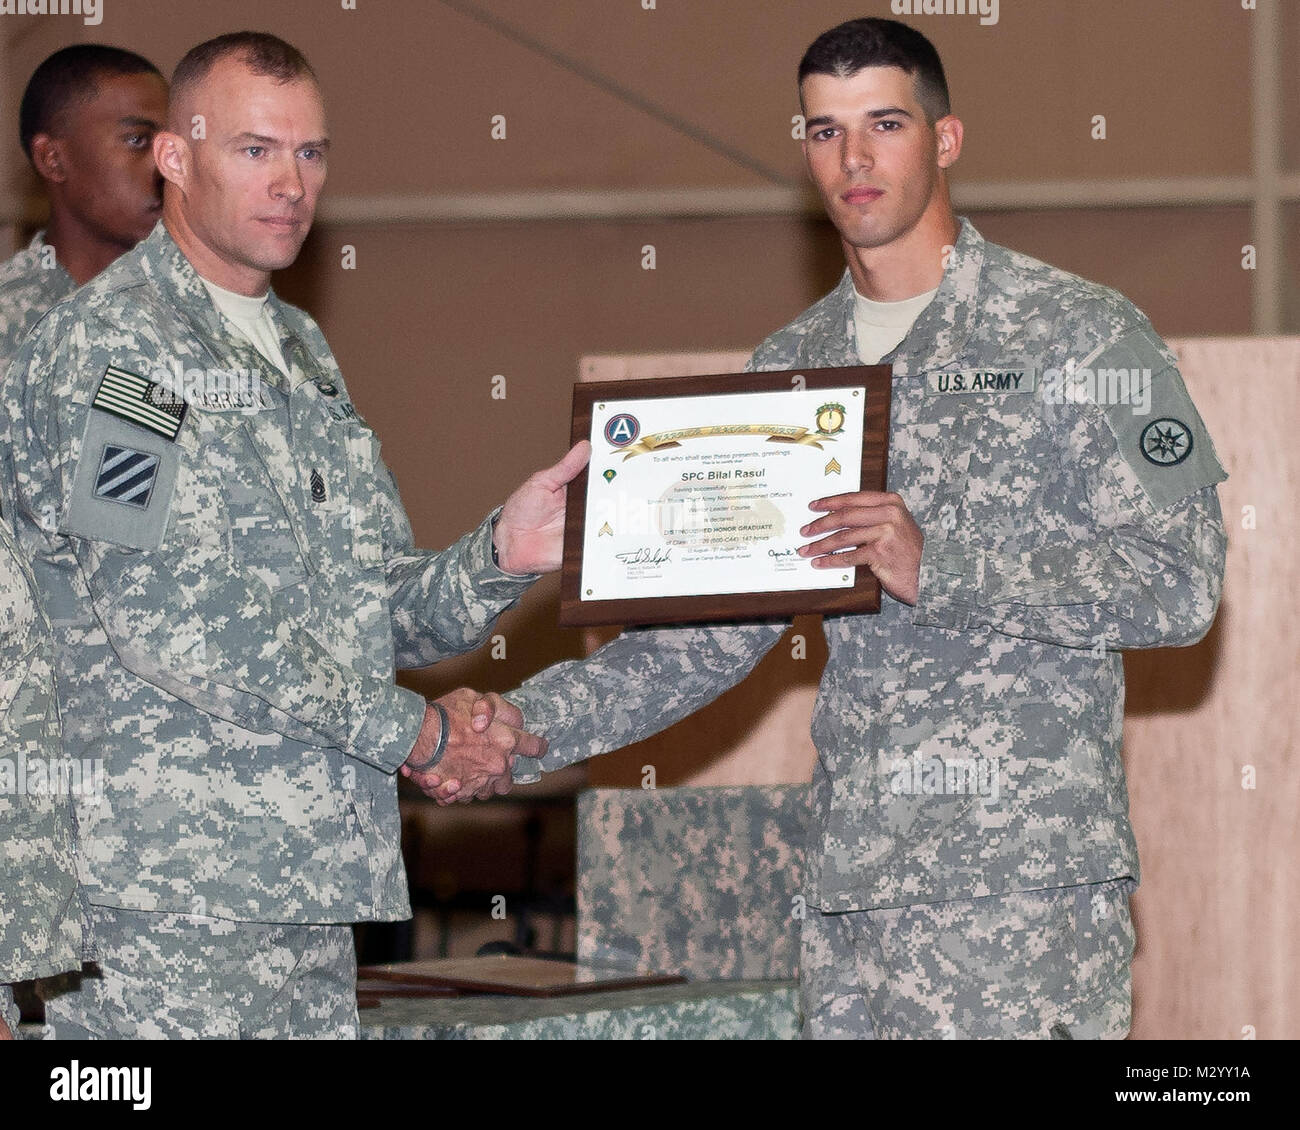 Spc. Bilal Rasul, a resident of Ravenna, Ohio, and a cook with the 316th Sustainment Command (Expeditionary), graduated from Warrior Leader Course, Class 12-709, at Camp Beuhring, Kuwait, Aug.27. Rasul was the Distinguished Honor Graduate of the class by earning over a 90%% on every testable assignment and having the overall highest average out of nearly 130 classmates. (U.S. Army Photo By Staff Sgt. Peter J. Berardi, 316th Sustainment Command (Expeditionary)) Distinguished Honor Graduate by 316th ESC Stock Photo